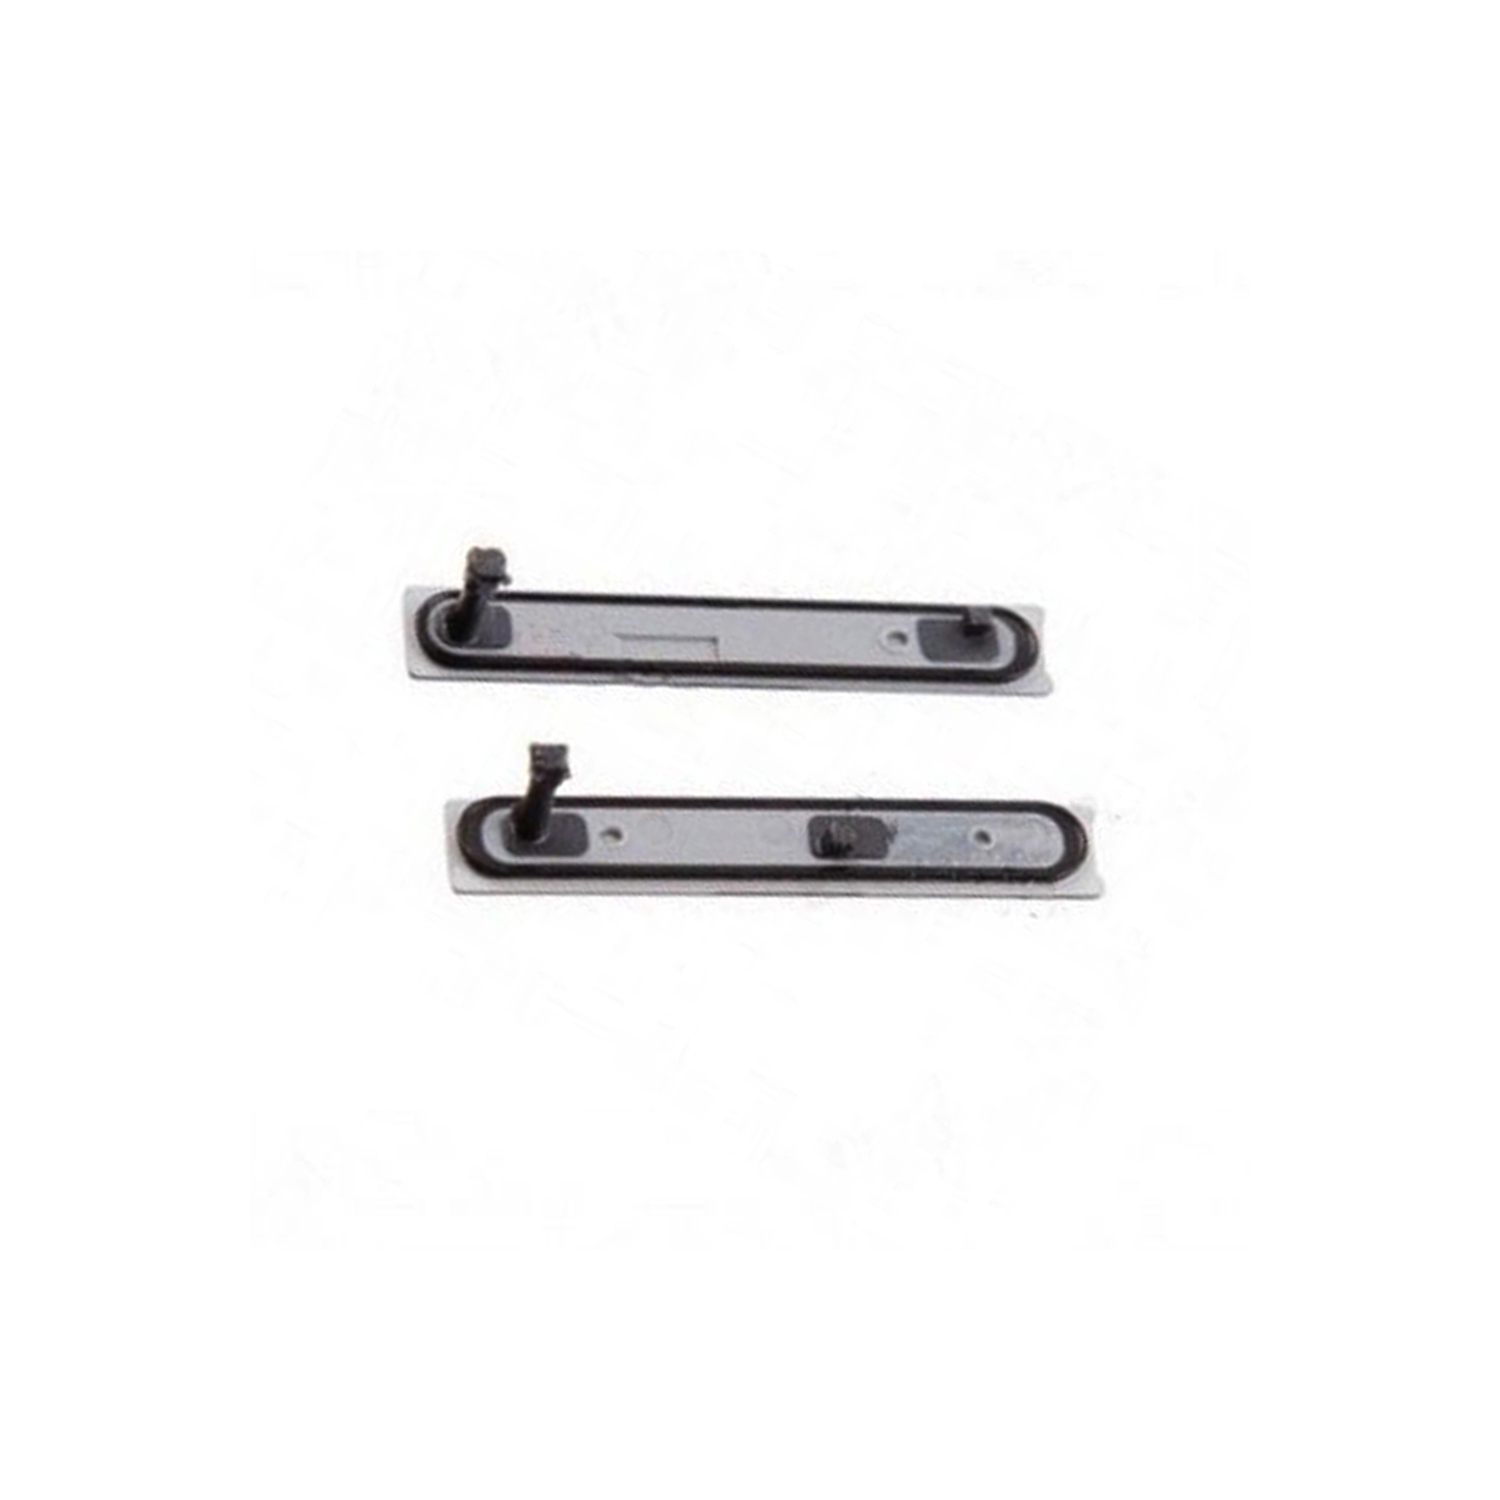 Sony Xperia Z3 Compact Button Cover Replacement Part - Black